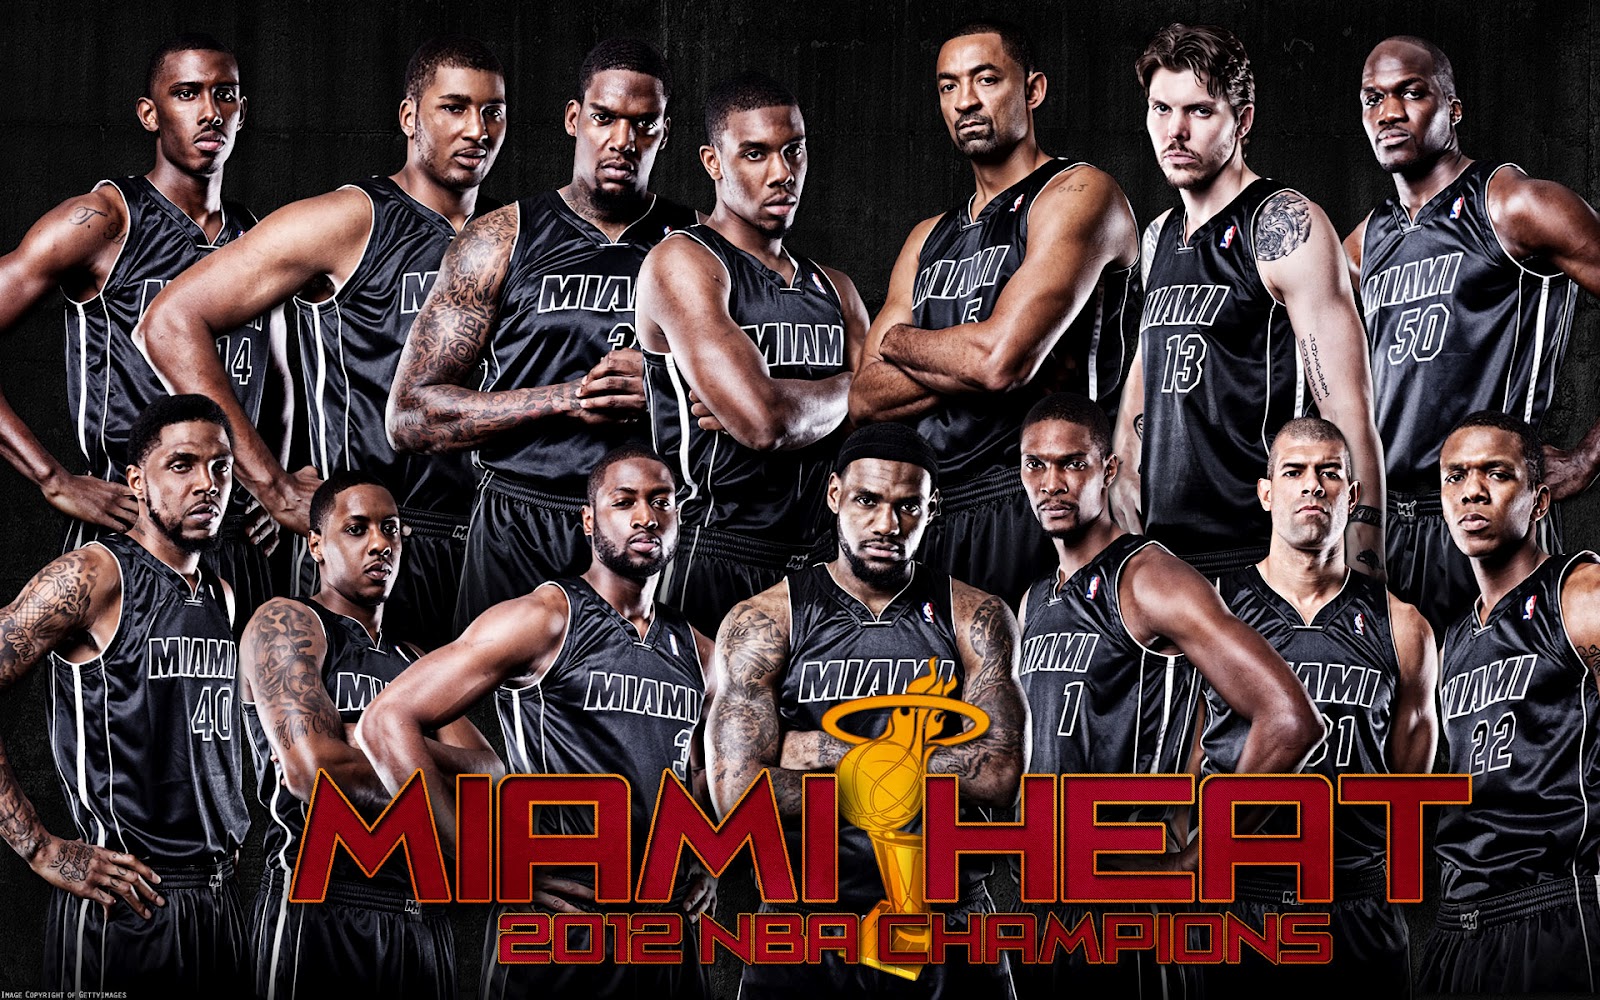 Widescreen Wallpaper Of Miami Heat Championship Roster There S A